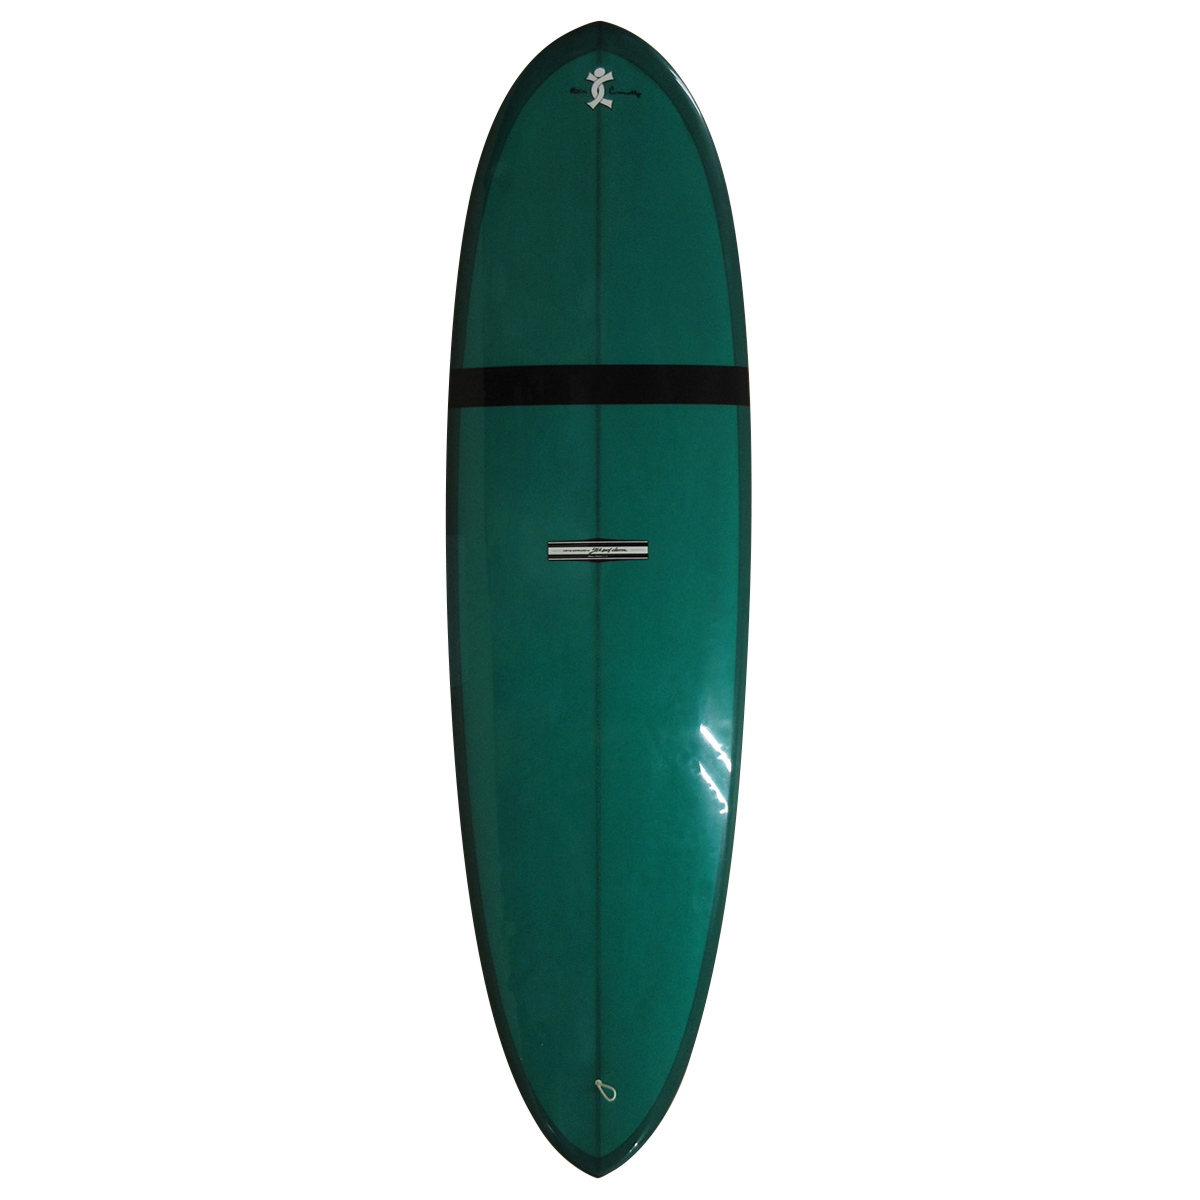 YU SURF CLASSIC / MAGIC CARPET 7`1 Shaped by KEVIN CONNELLY